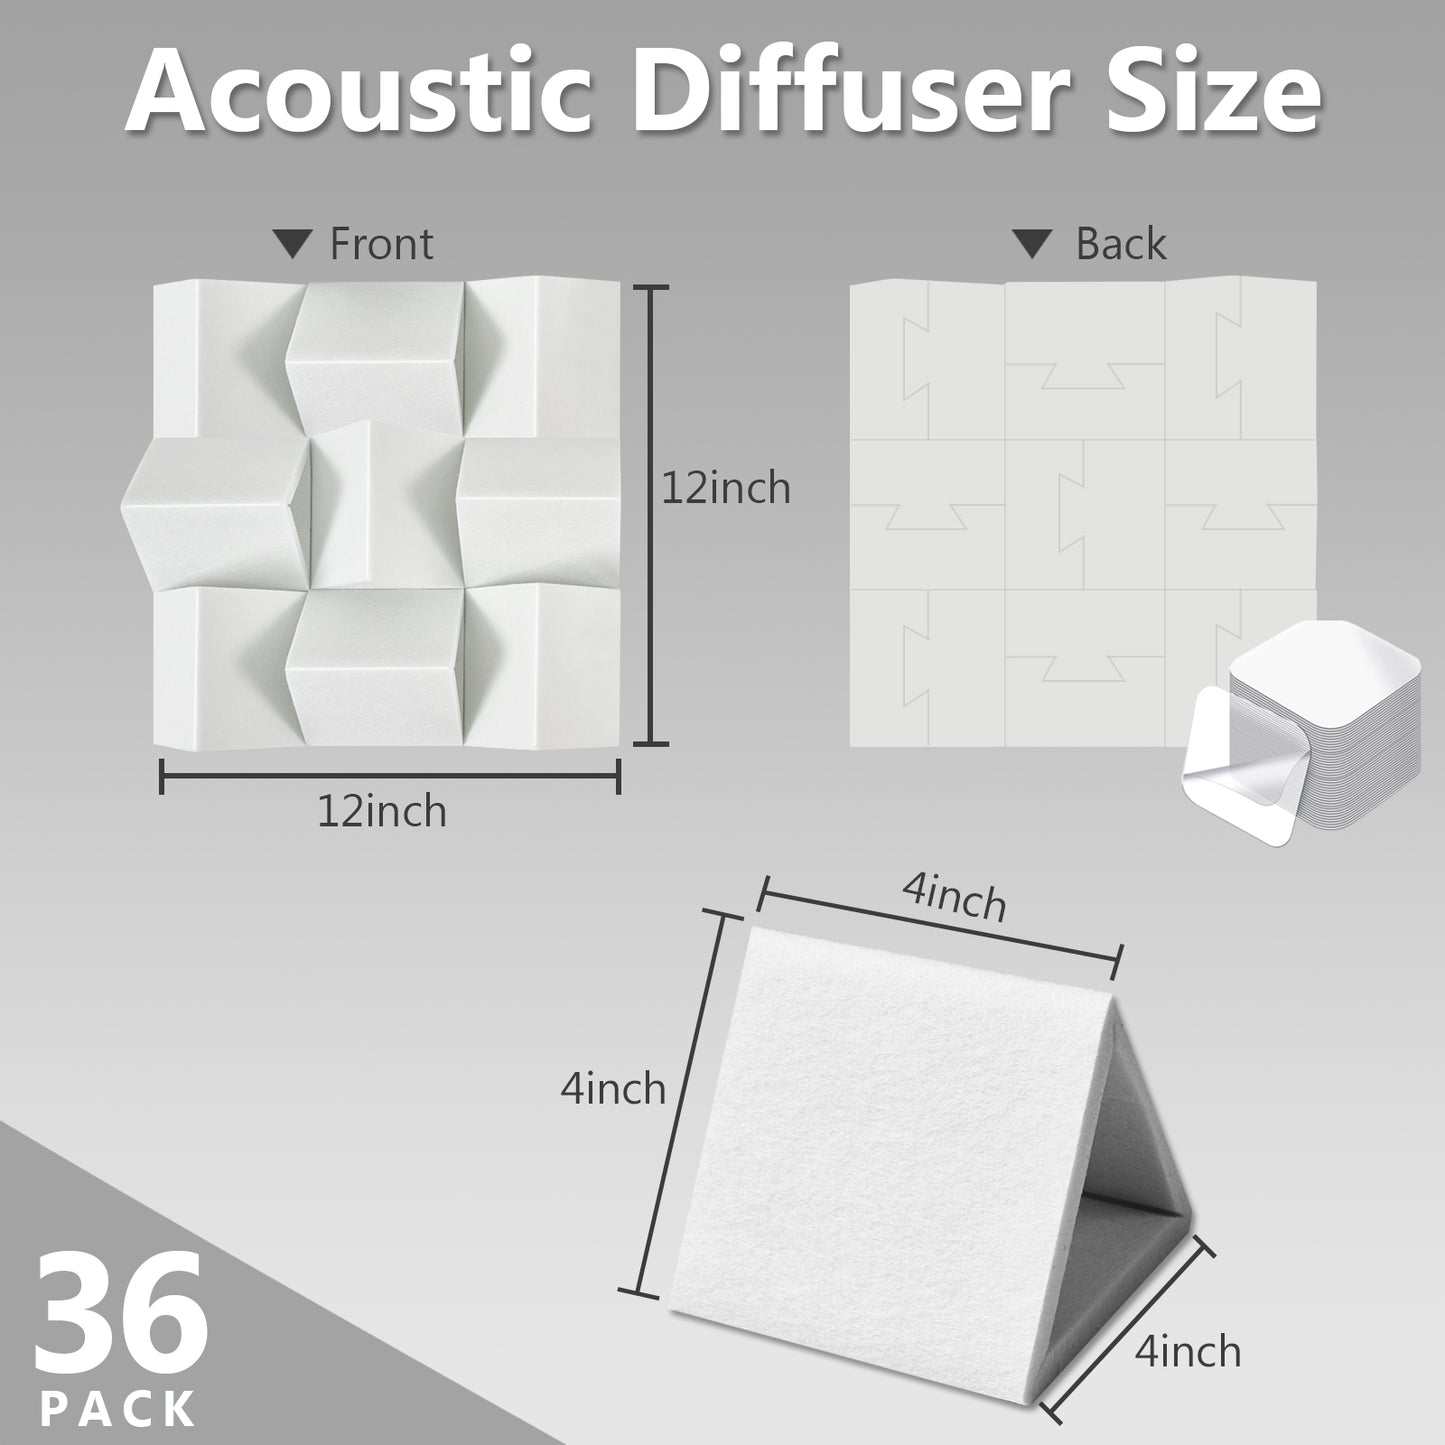 Bubos 36 pcs Acoustic Diffusers 24*24 inches